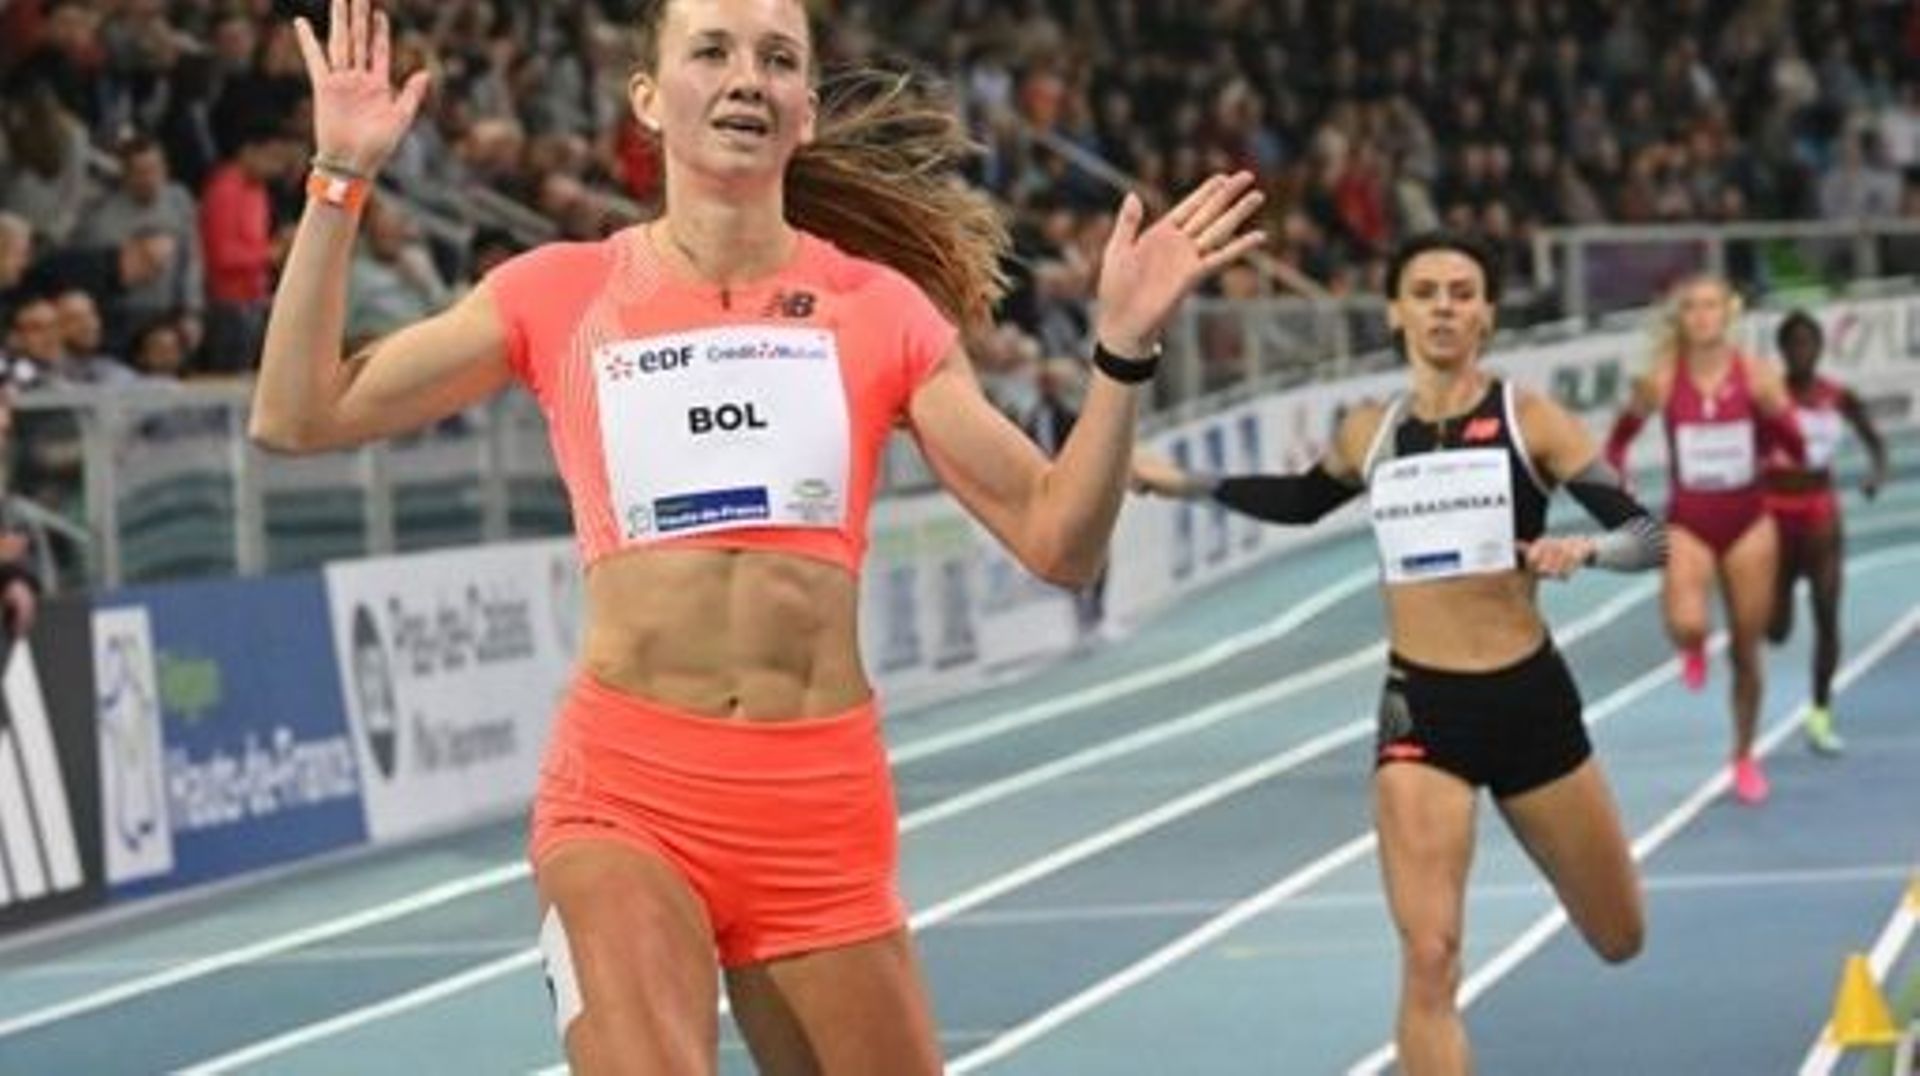 Netherlands' Femke Bol competes to win the women's 400m Final A race during the "Hauts de France" indoor athletics meeting in Lievin, on February 15, 2023.  FRANCOIS LO PRESTI / AFP